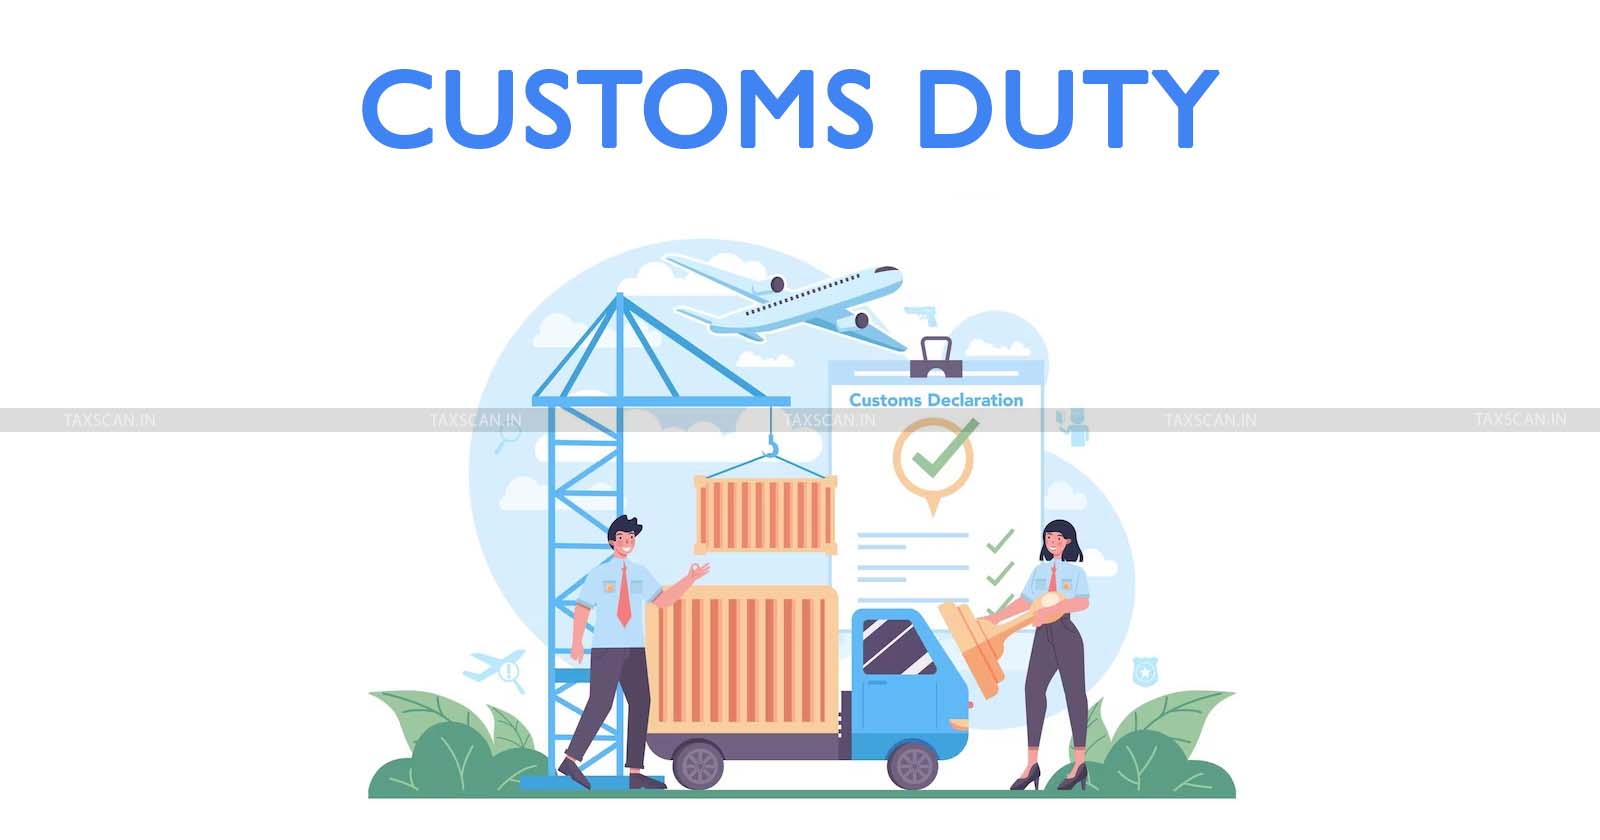 Customs Duty payable - Advance for days - New Retail Price - Closed Production-Claim to be filed -CESTAT-TAXSCAN